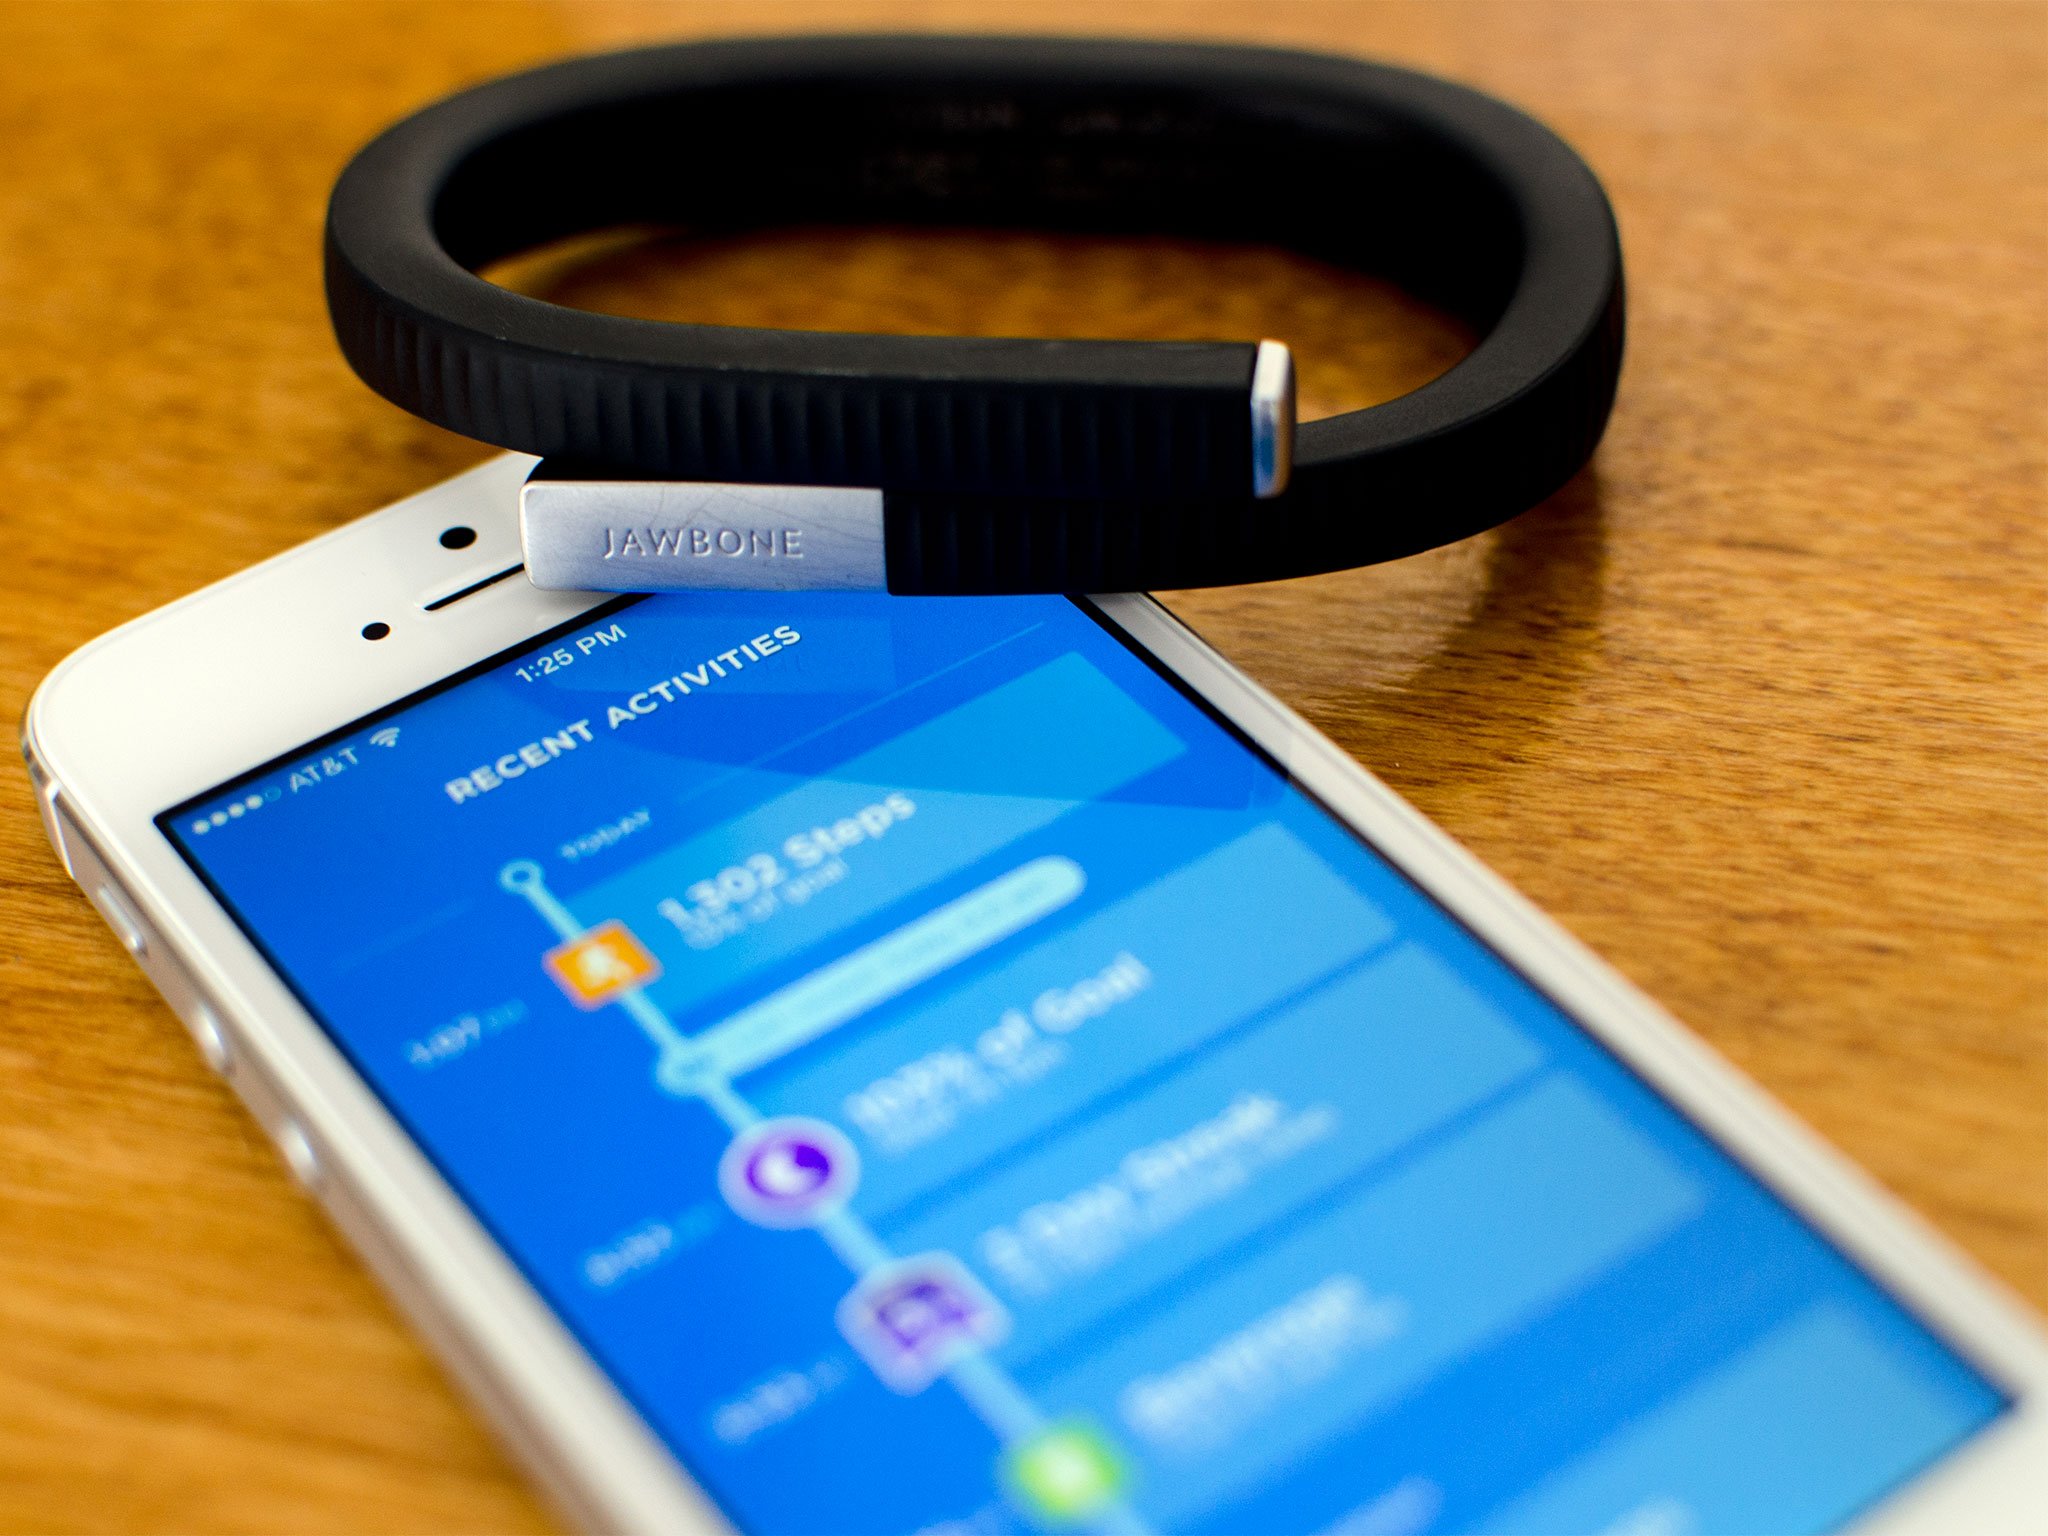 UP24 by Jawbone review